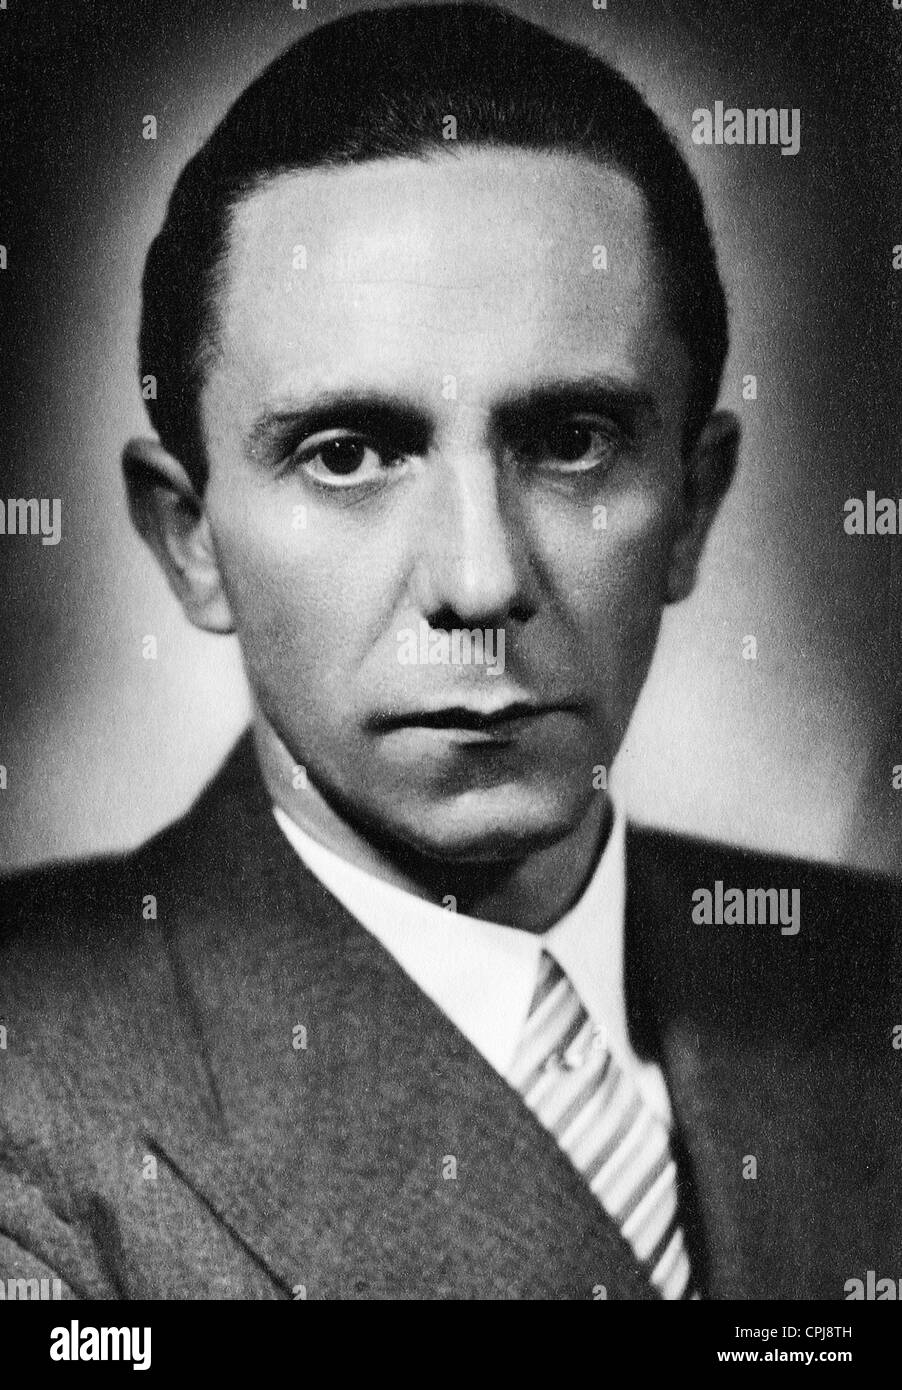 Reich Minister Goebbels Stock Photos & Reich Minister Goebbels Stock ...